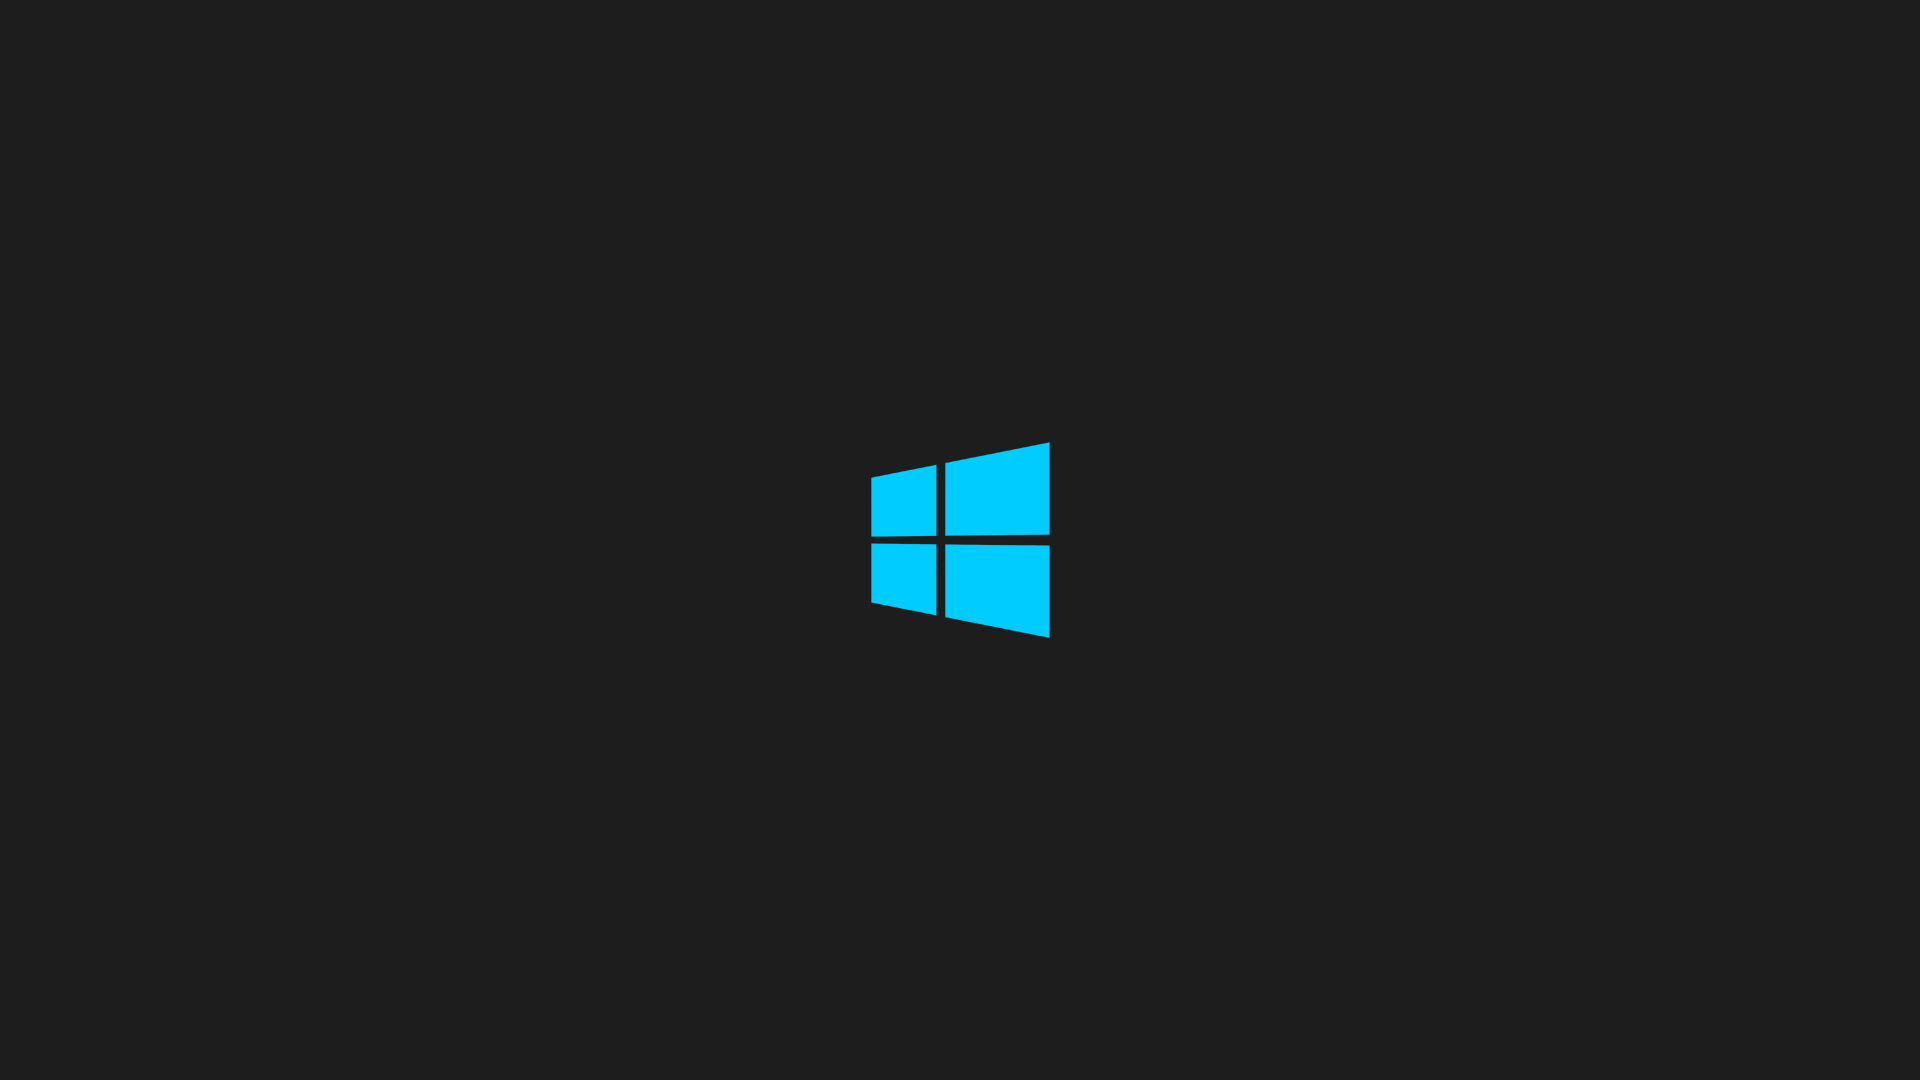 20+ Microsoft wallpapers HD | Download Free backgrounds